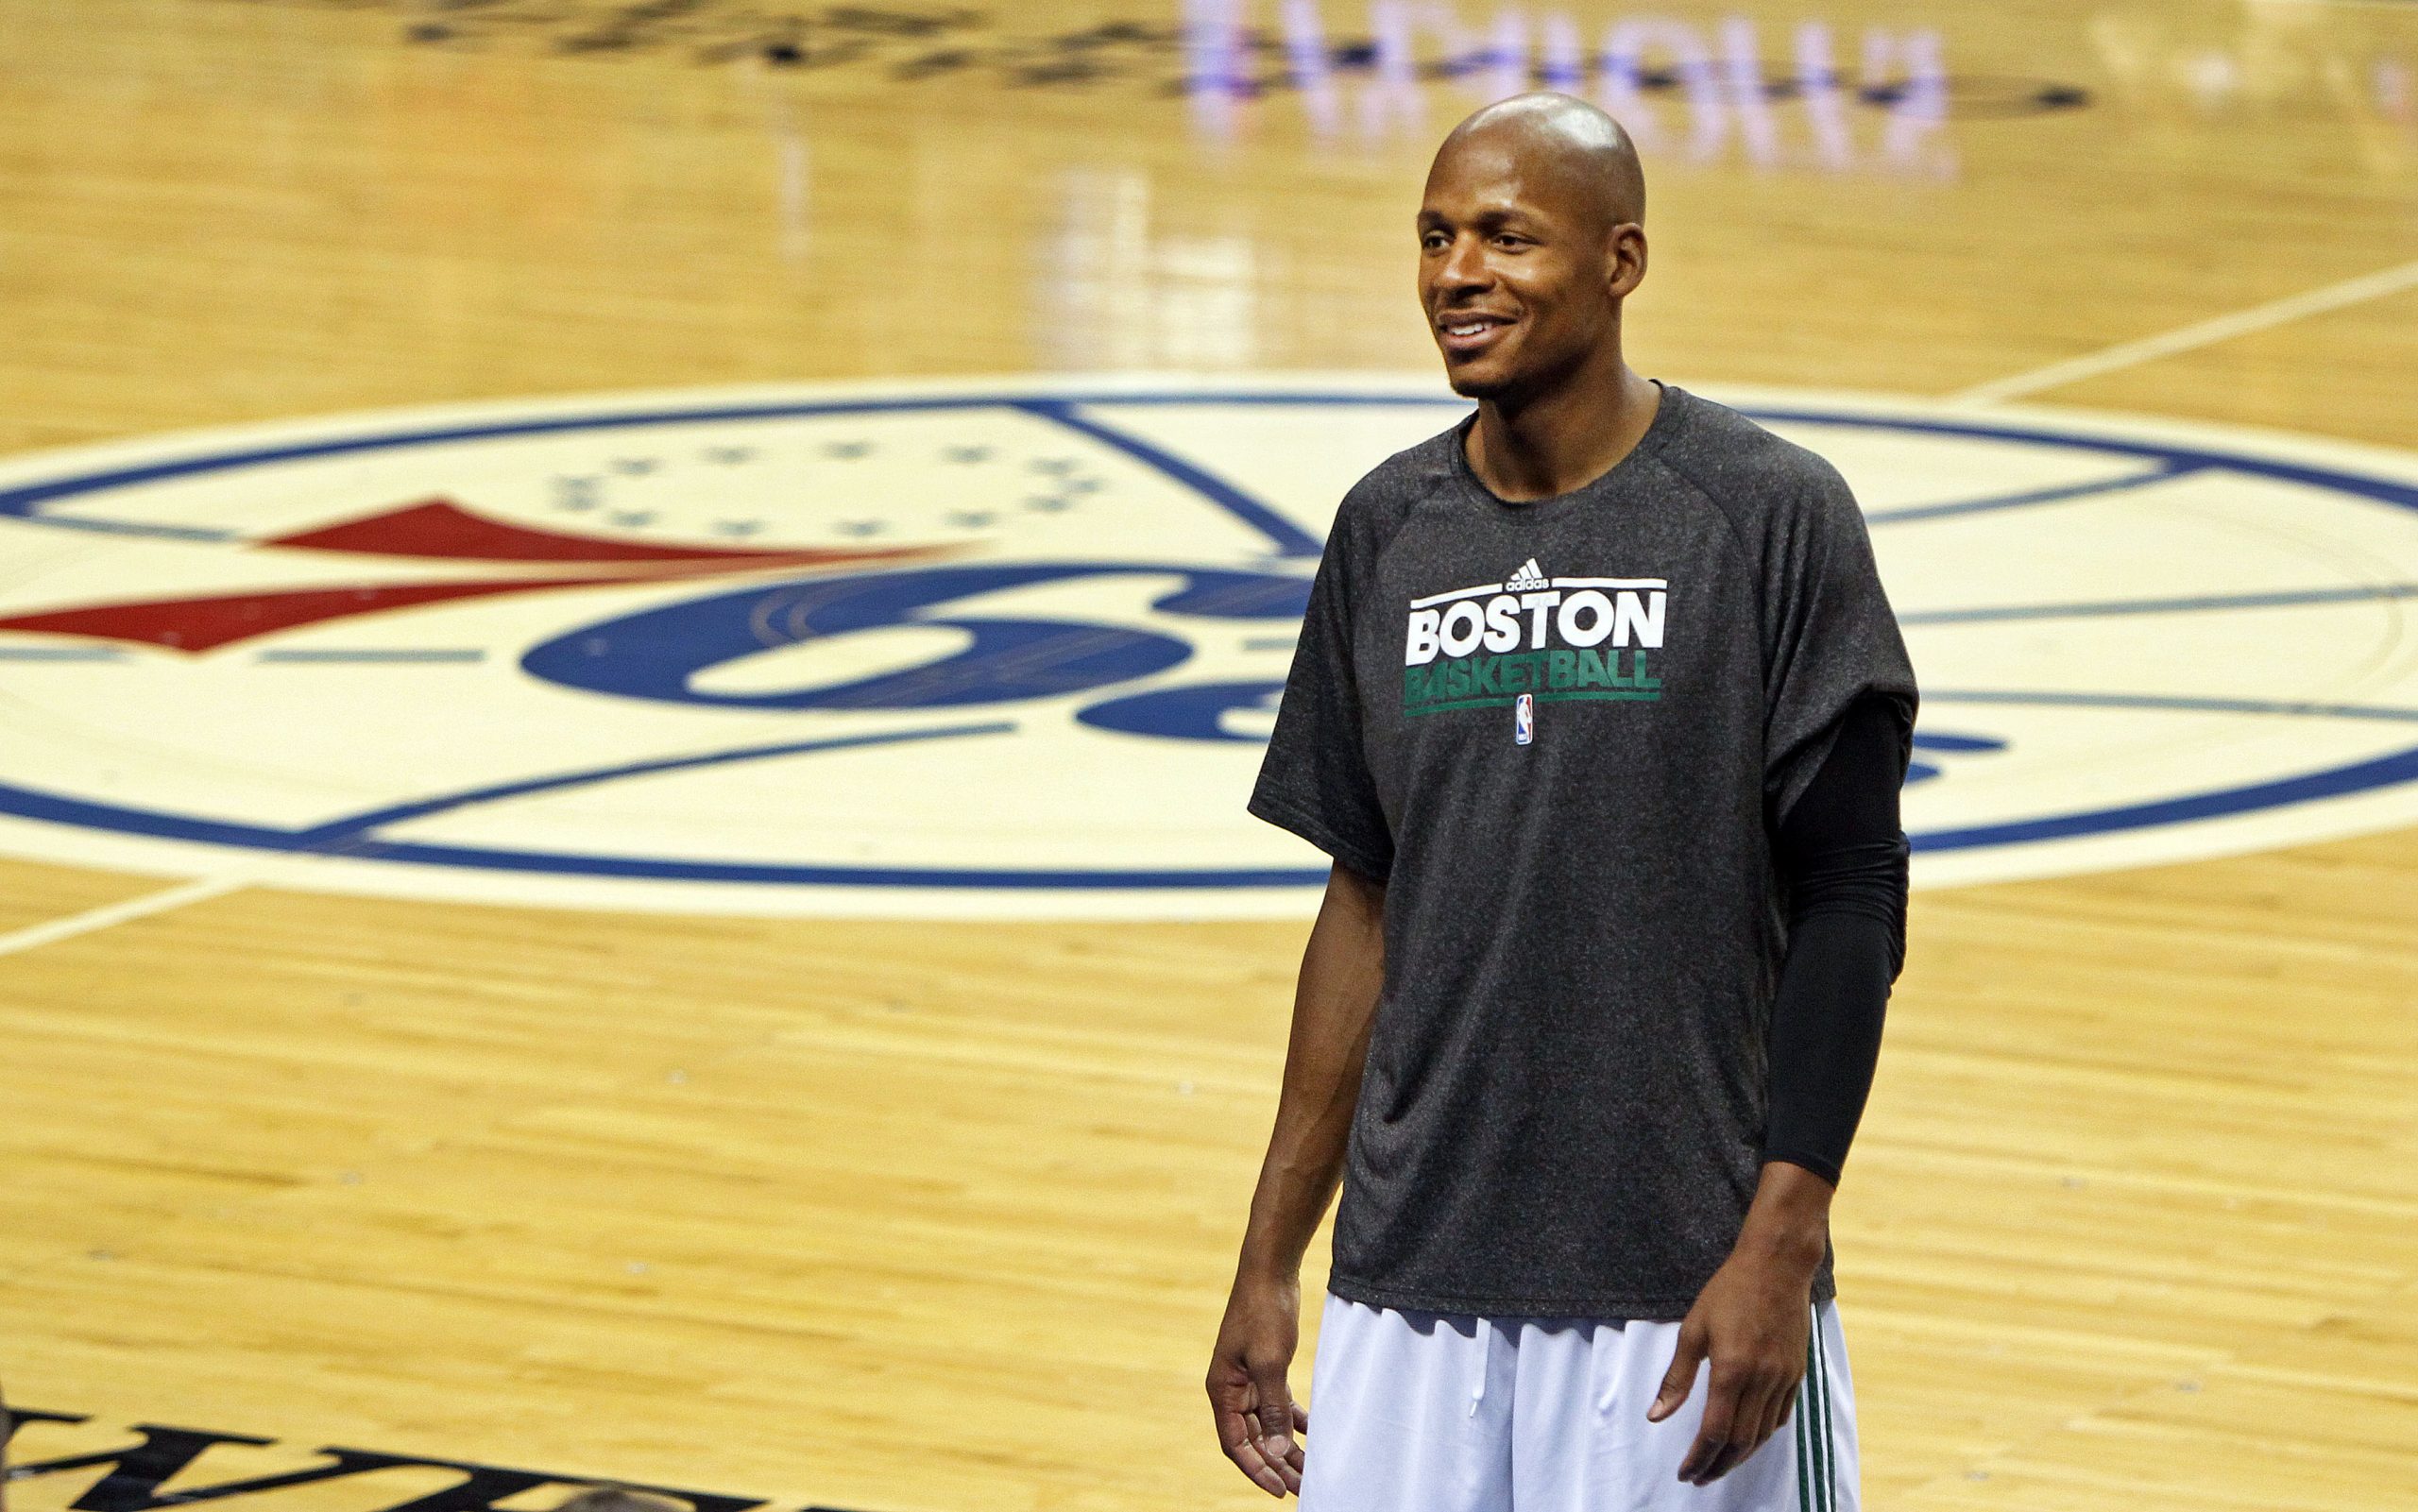 The Celtics' Ray Allen was out on the court early, as usual, working on his game, as the Boston Celtics visited the Philadelphia 76ers.